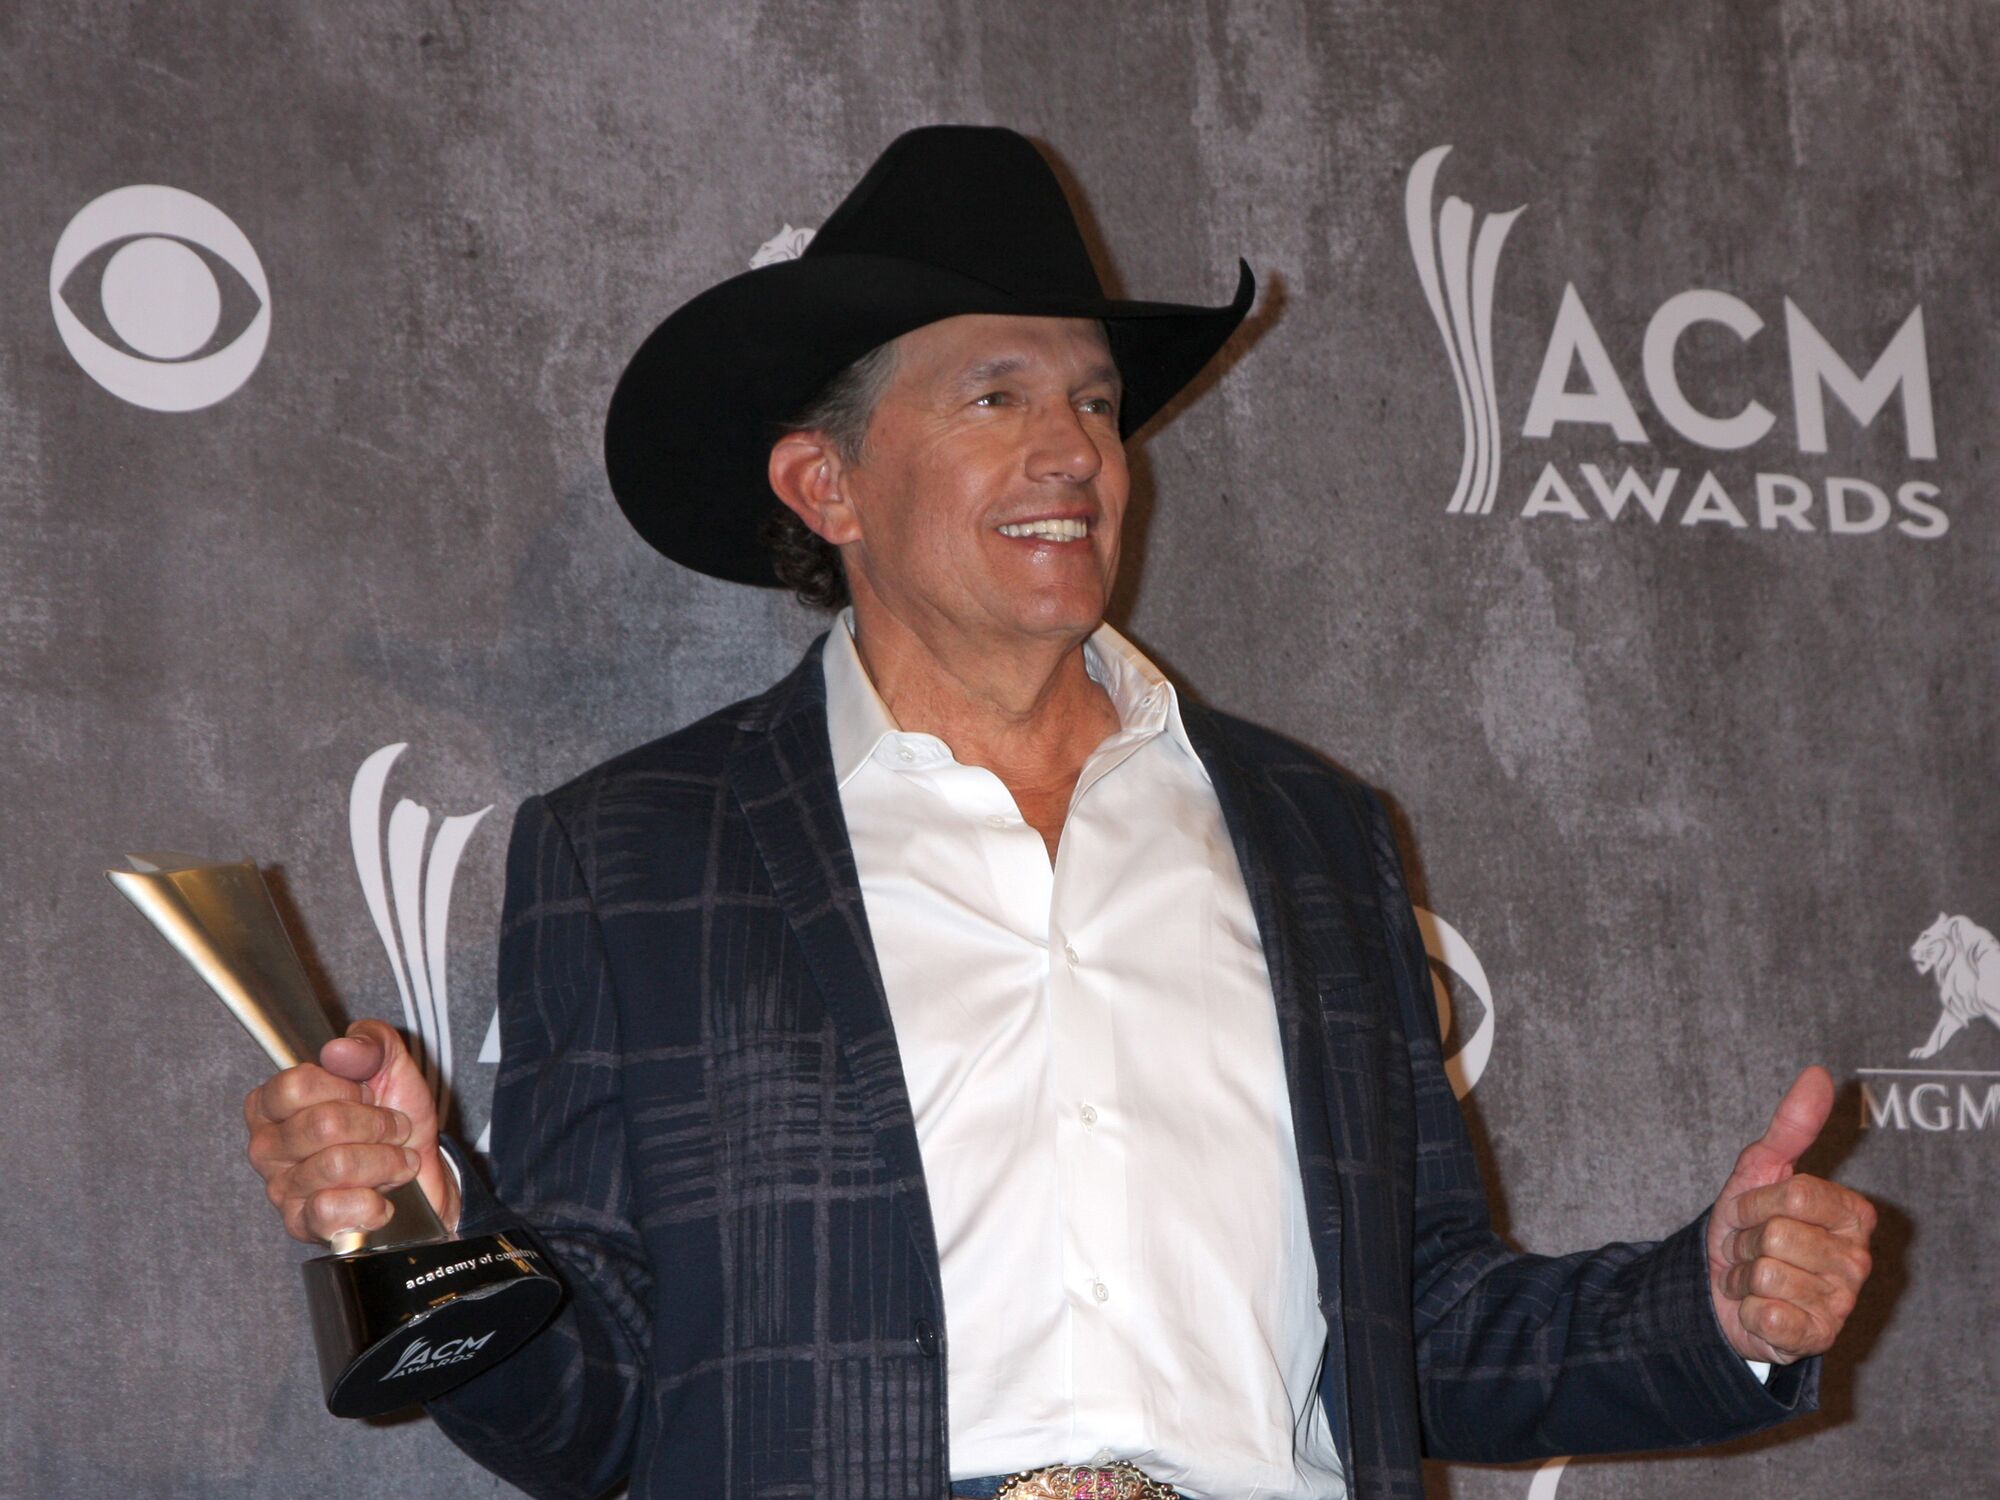 George Strait at the 2014 Academy of Country Music Awards